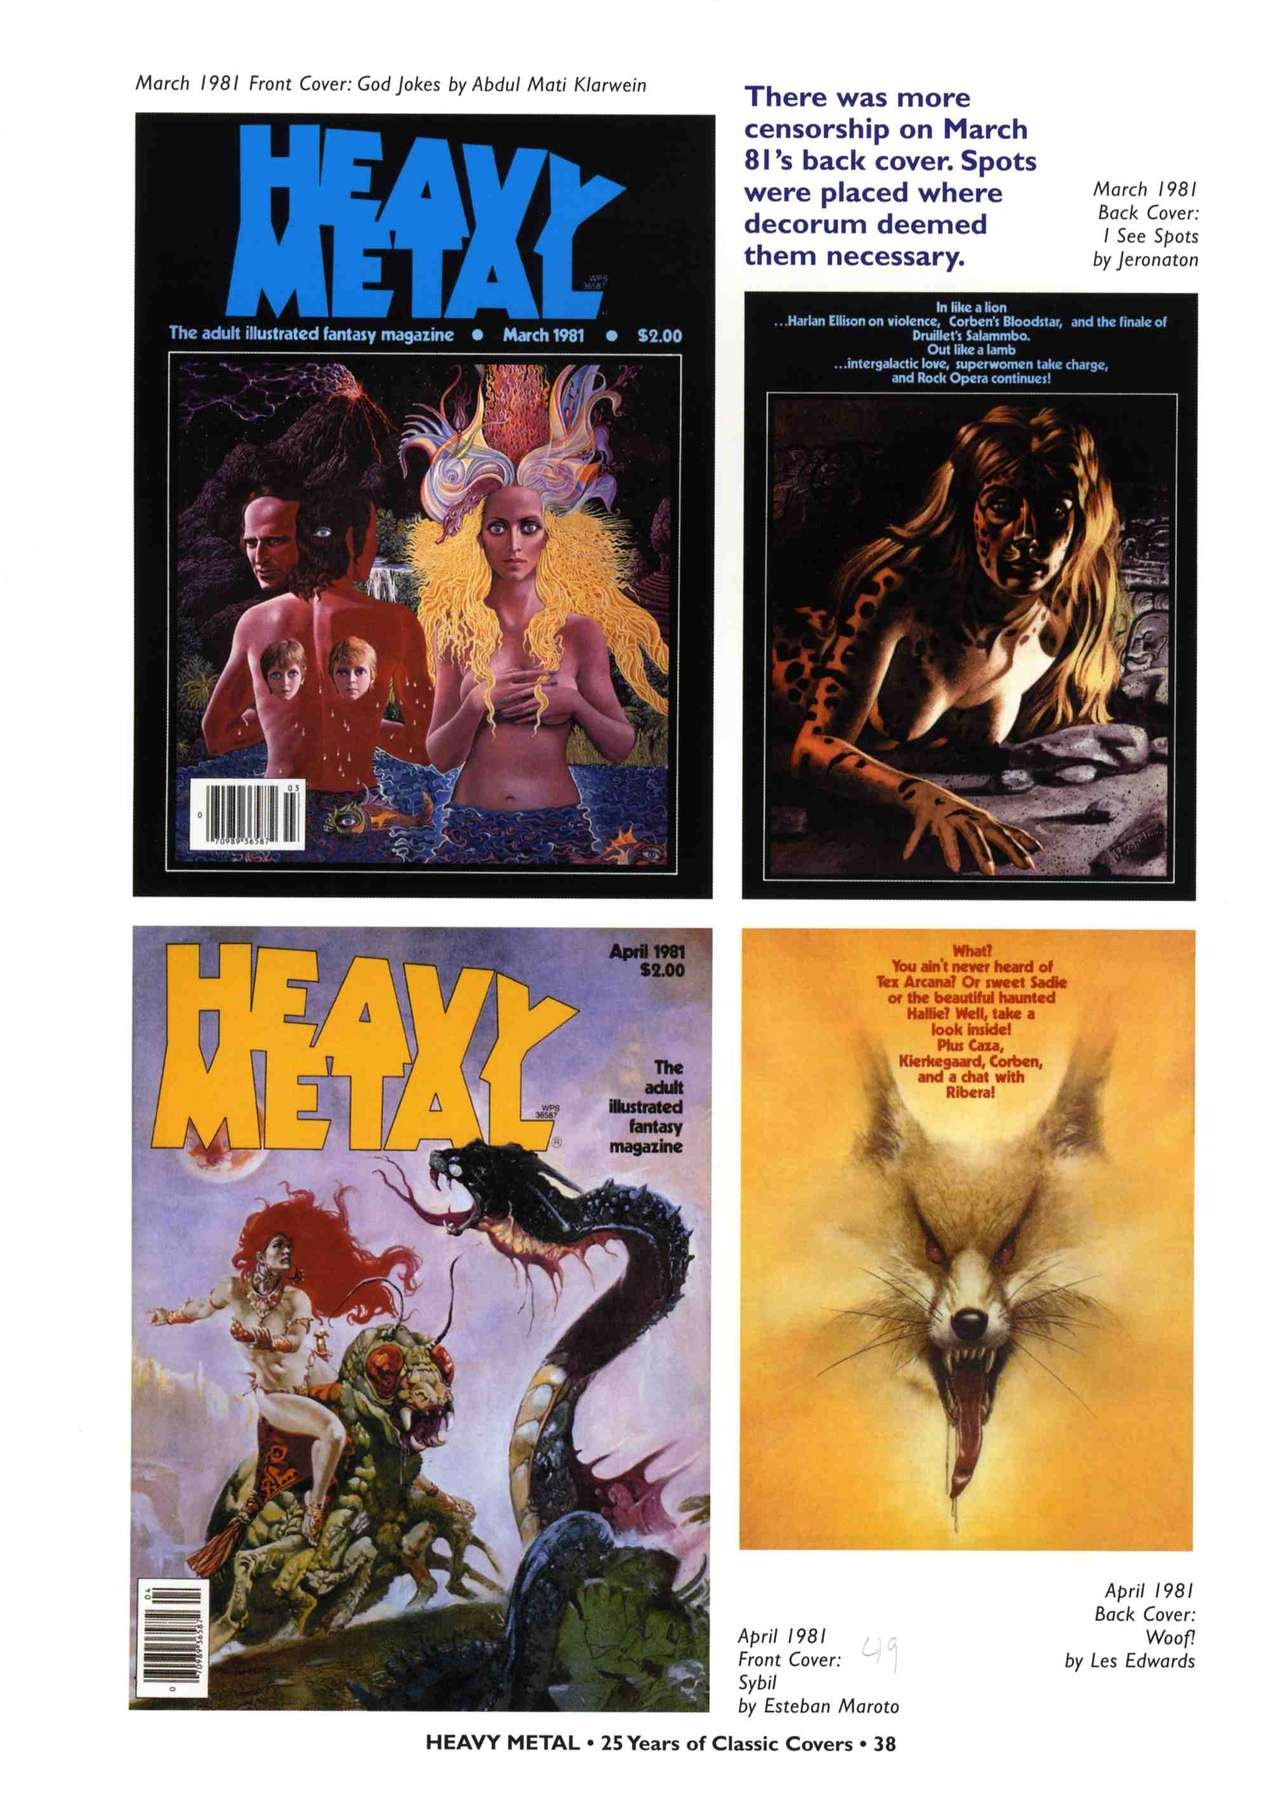 HEAVY METAL 25 Years of Classic Covers 43